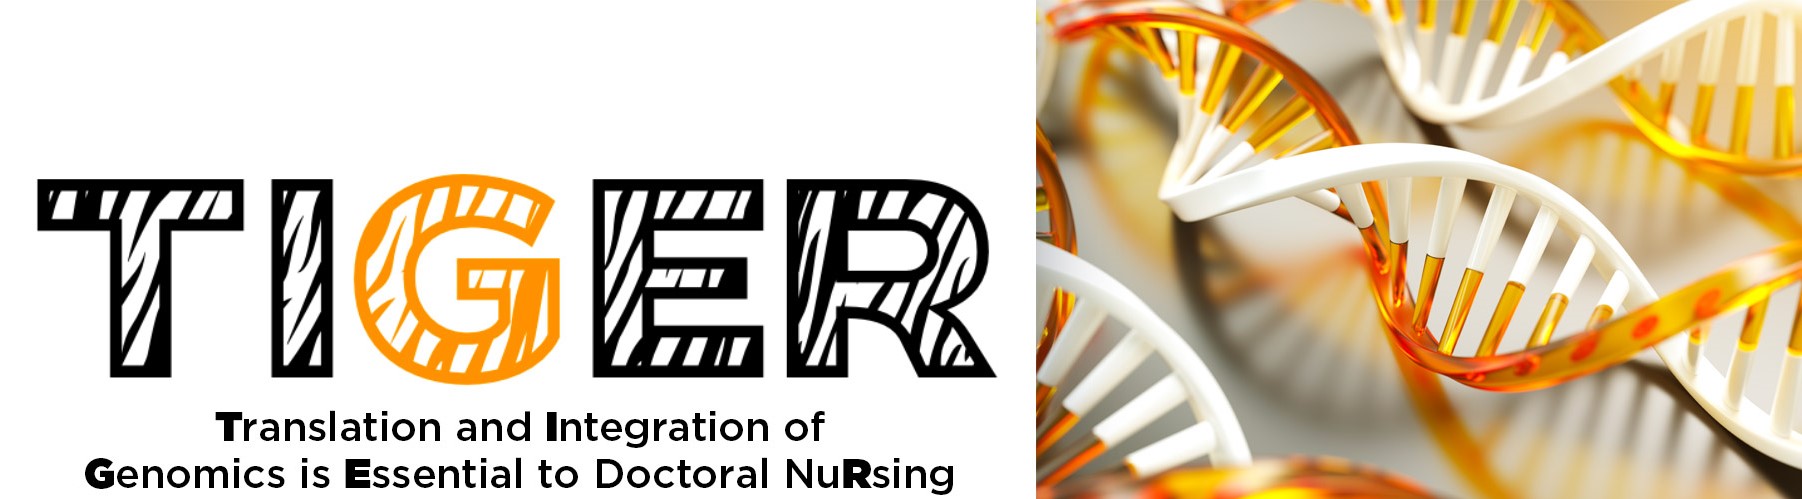 TIGER: Translation and Integration of Genomics is Essential to Doctoral Nursing with image of DNA strand